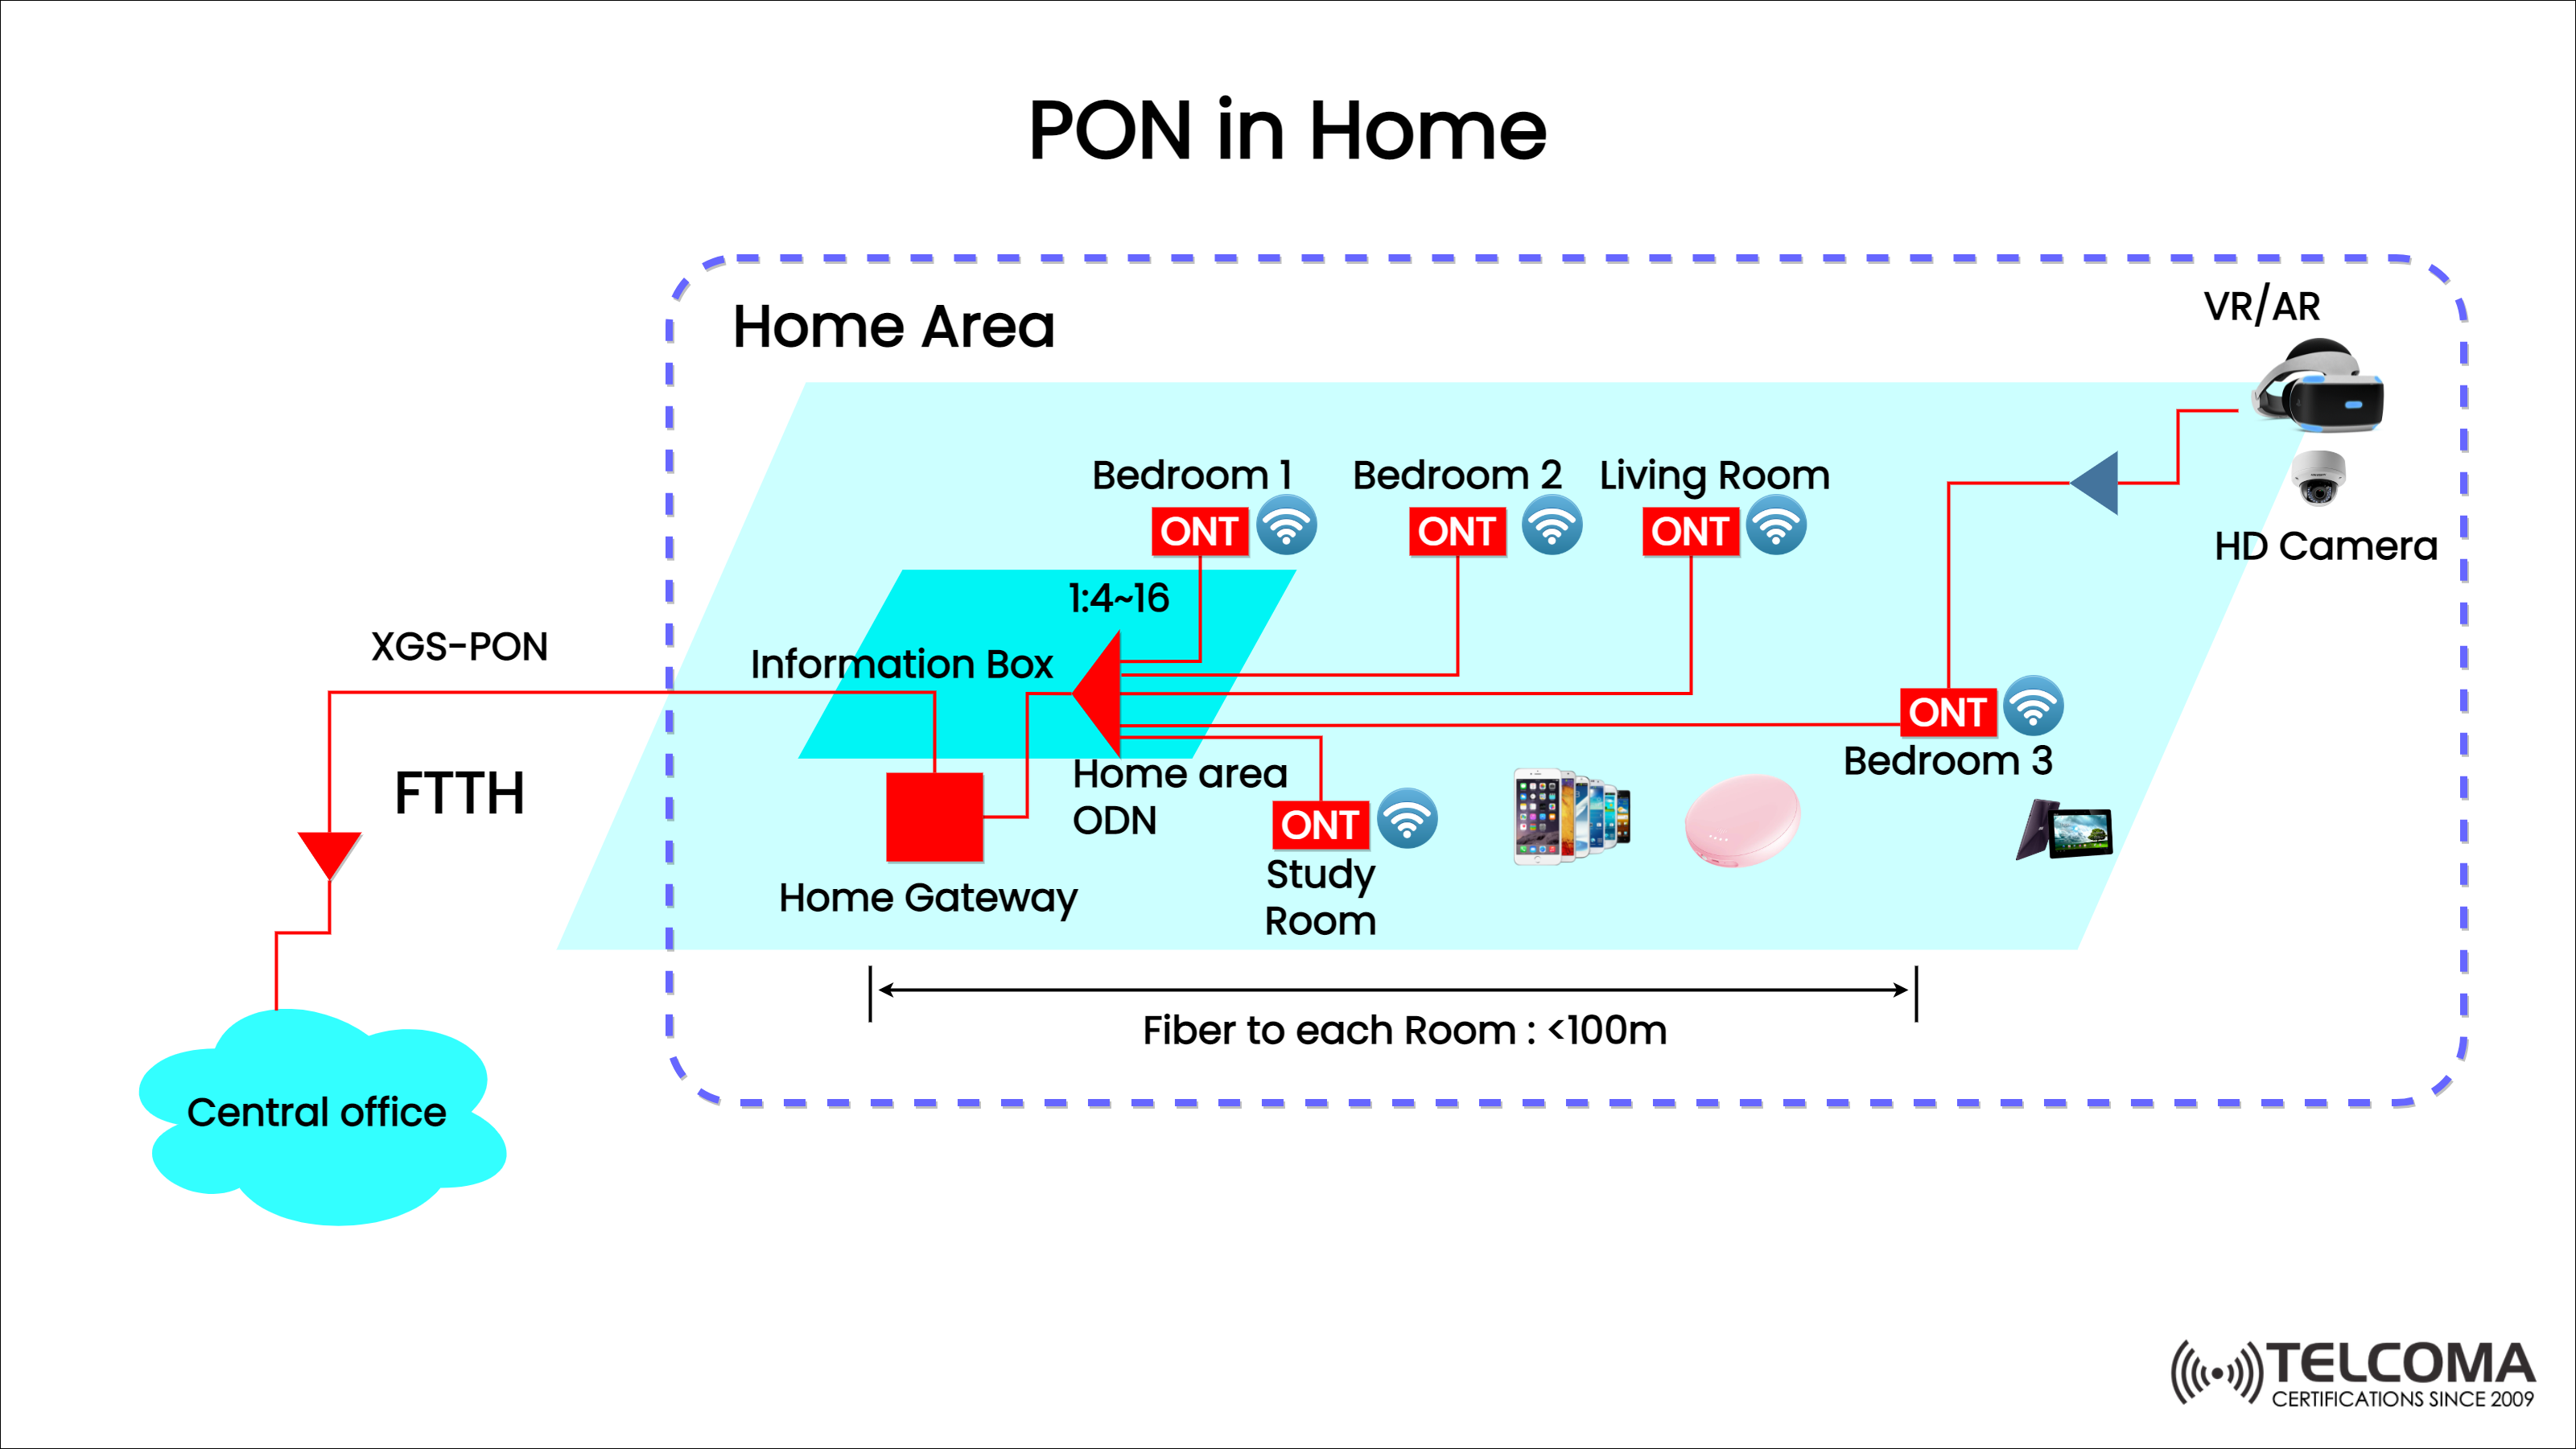 pon in home